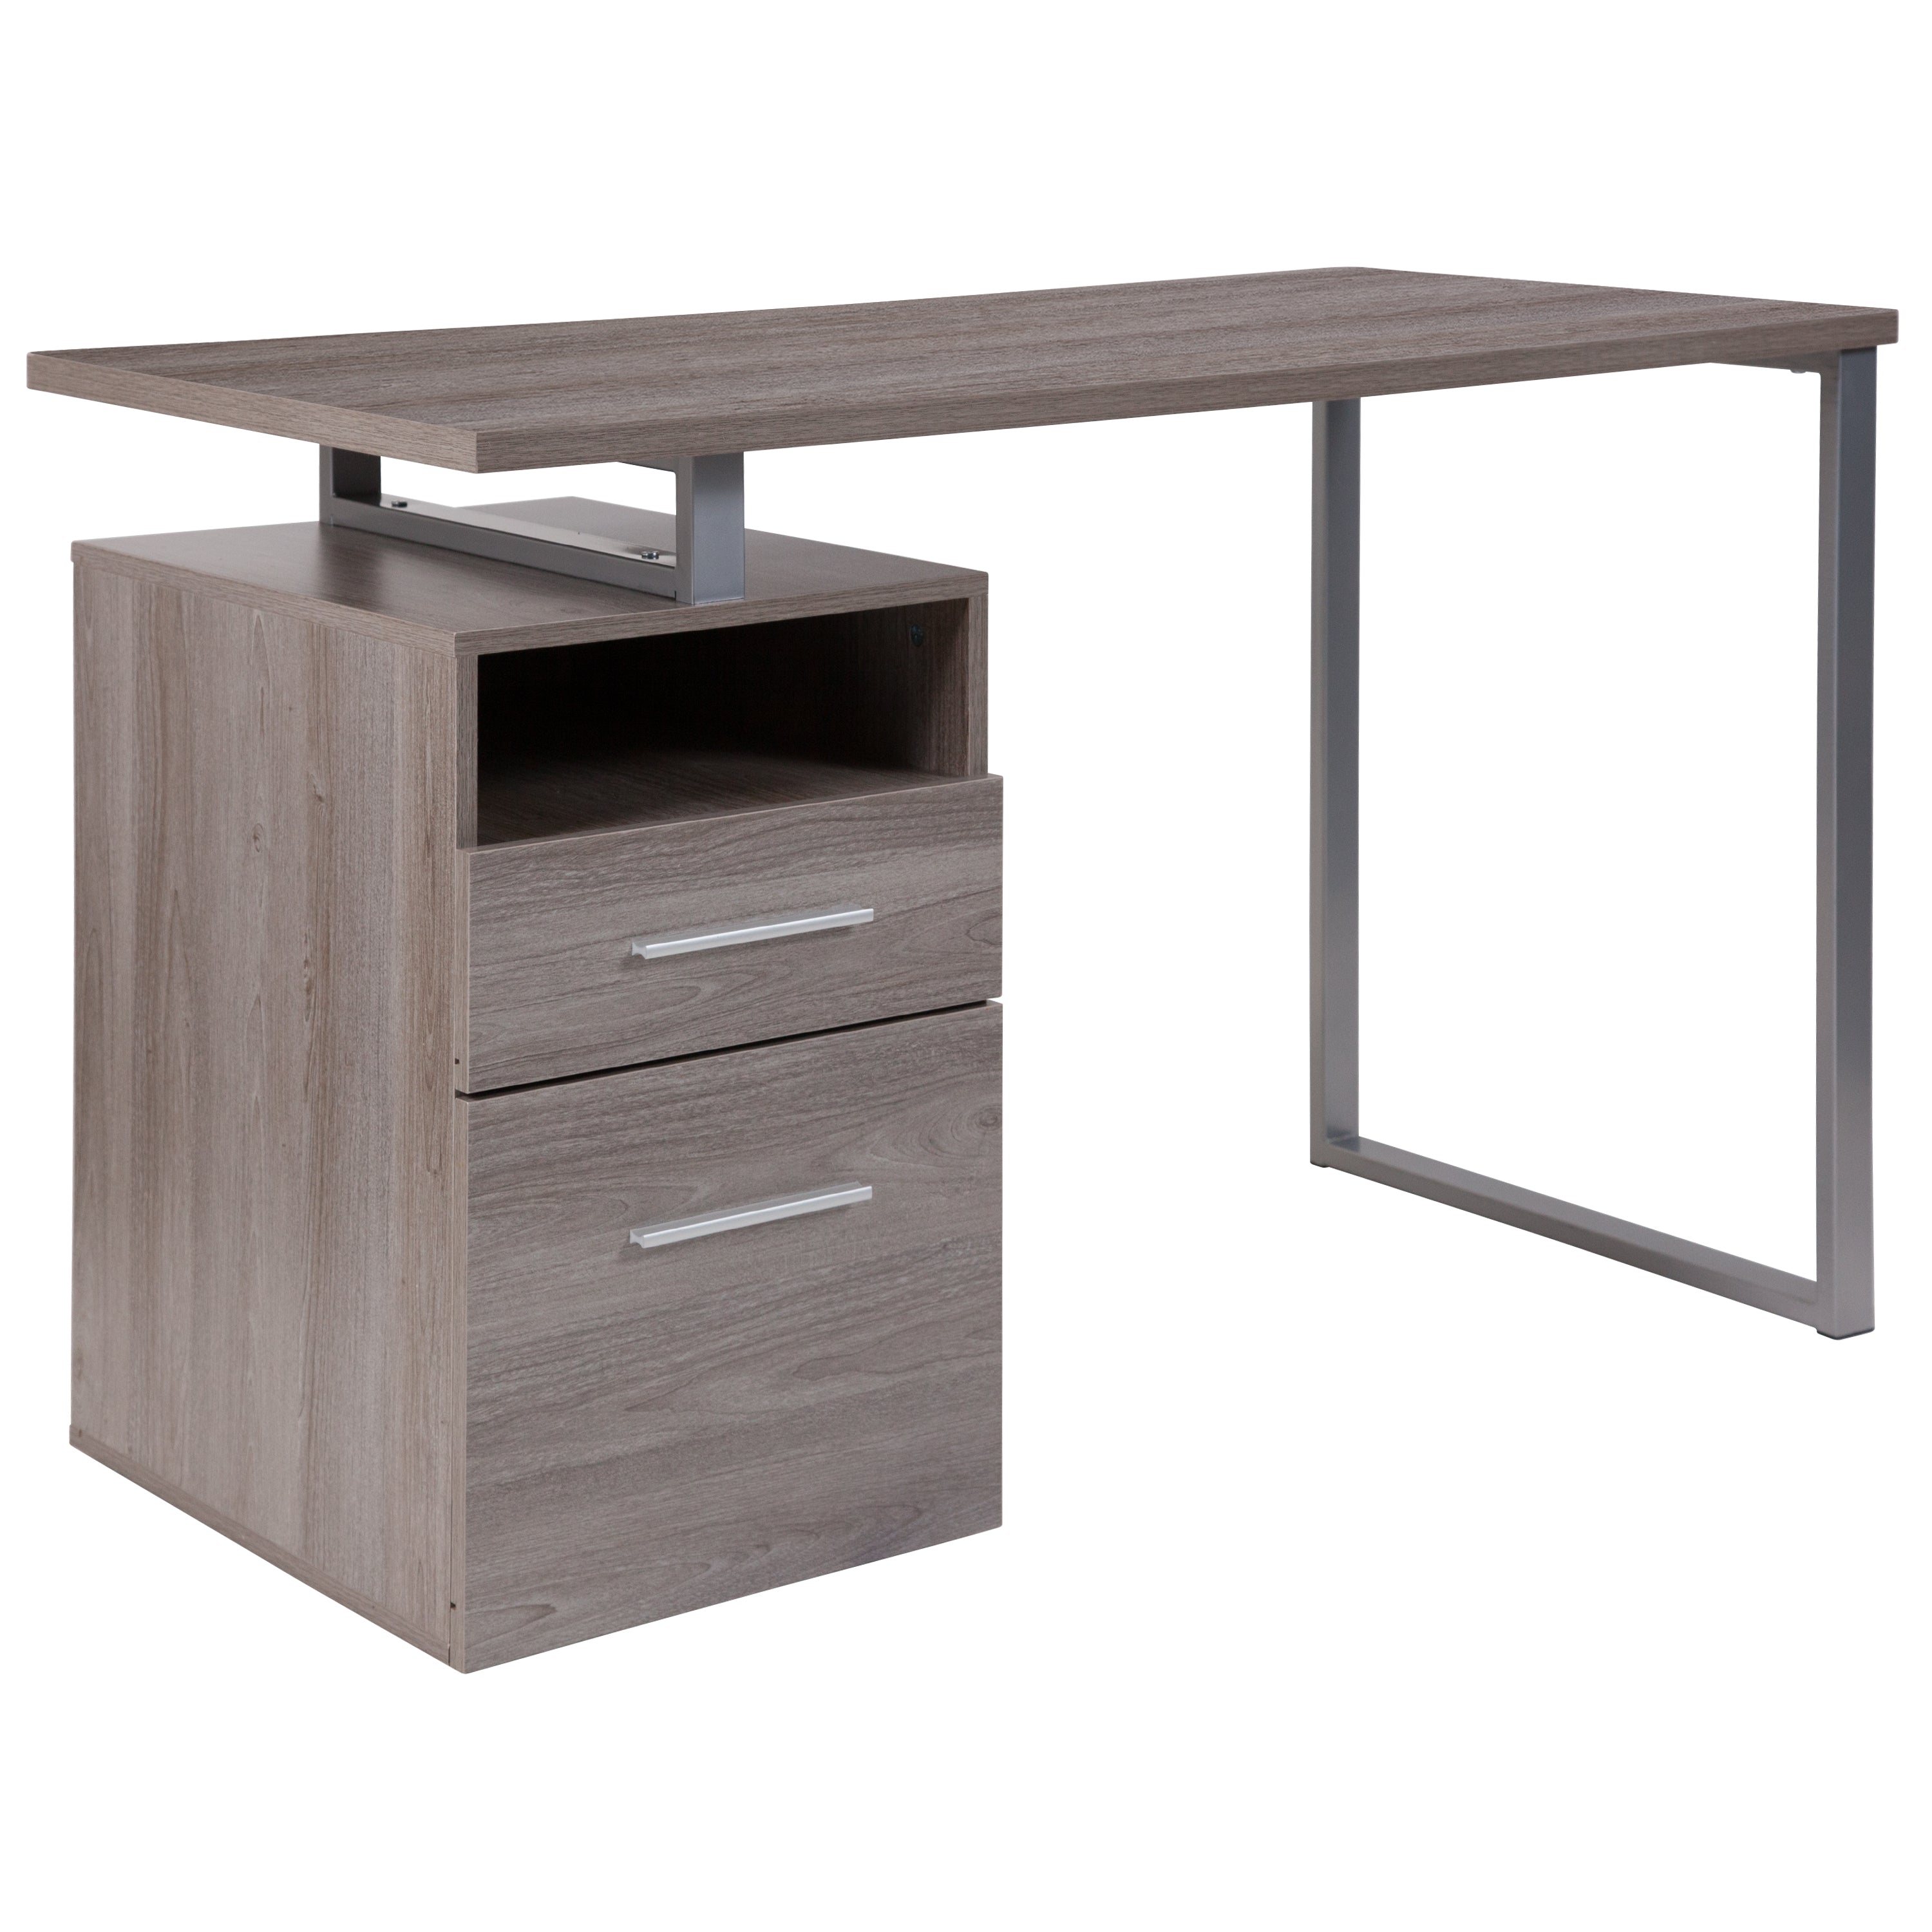 Harwood Desk with Two Drawers and Metal Frame-Desk-Flash Furniture-Wall2Wall Furnishings